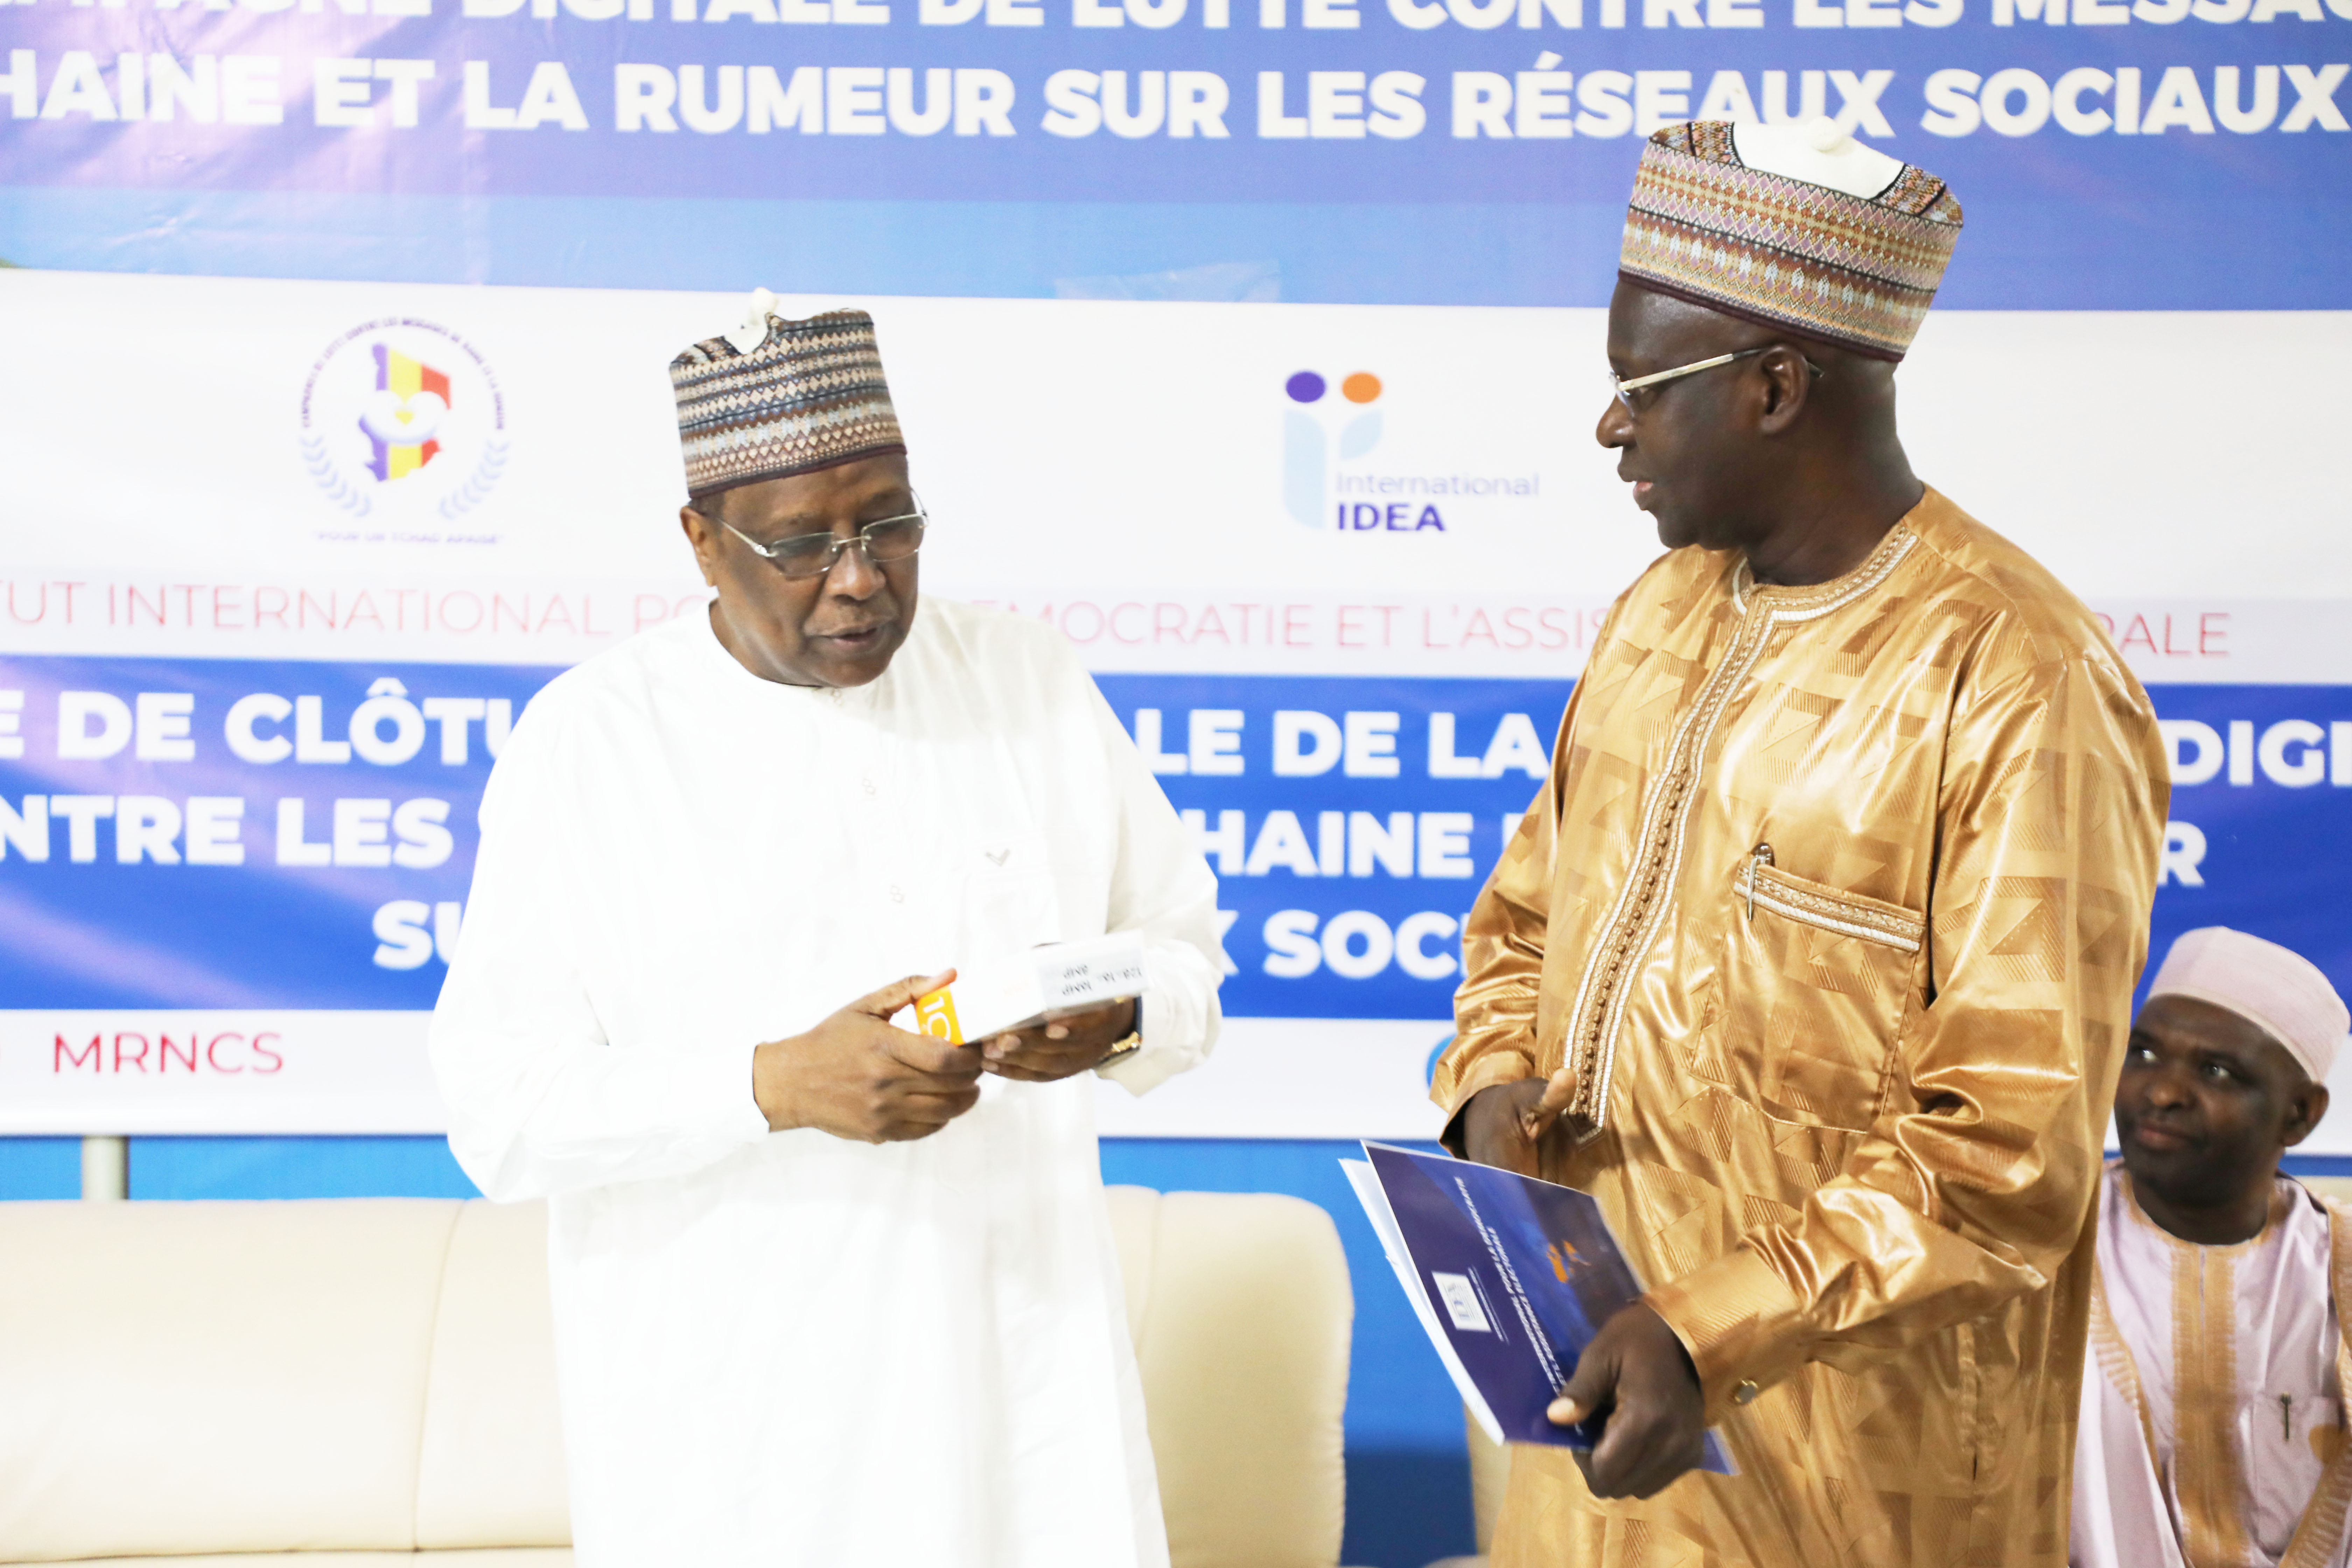 The IDEA International Chad Programme Manager symbolically handing over the campaign platforms to the Minister of National Reconciliation and Social Cohesion.